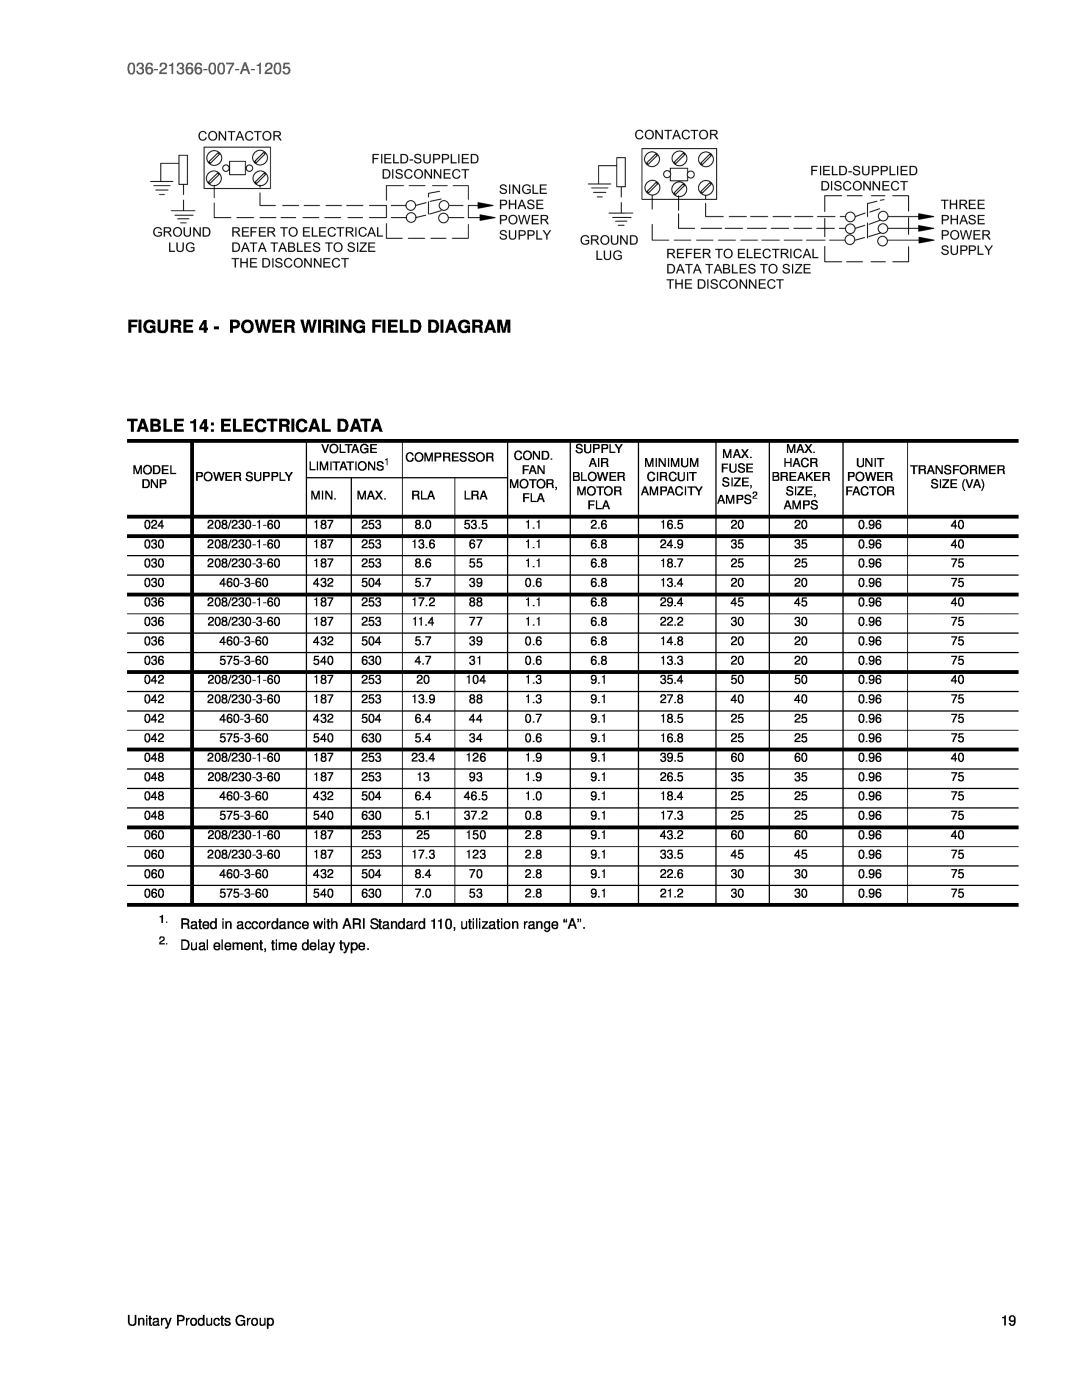 York DNP048, DNP060 Power Wiring Field Diagram, Electrical Data, 036-21366-007-A-1205, Dual element, time delay type 